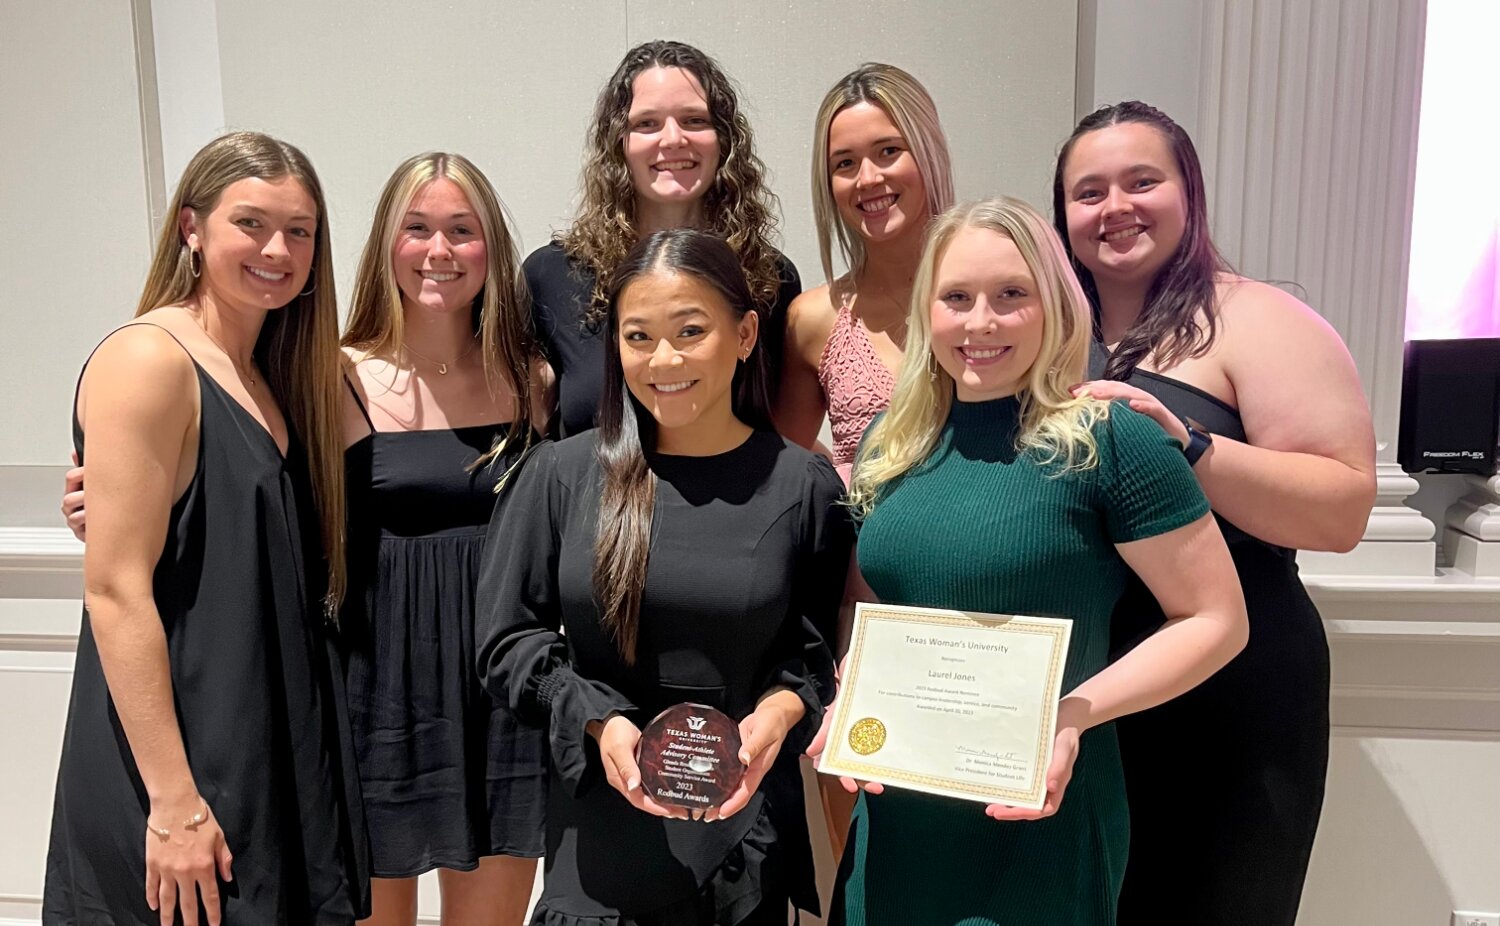 Laurel Jones, front right with certificate, served as president of the Student Athlete Advisory Committee at TWU which was honored for community service.